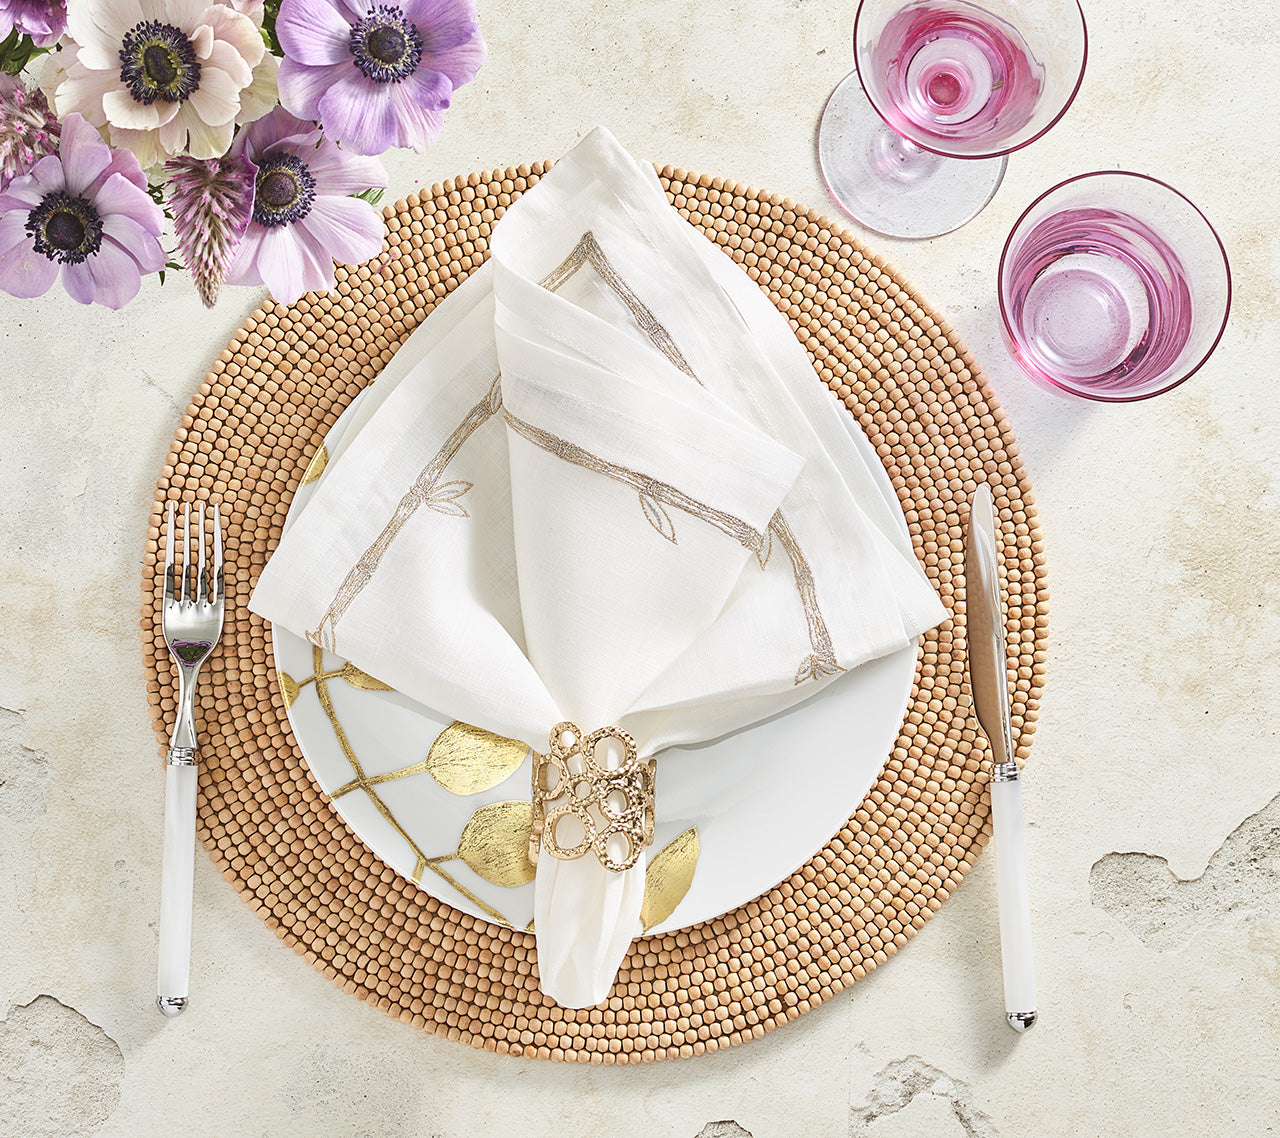 Bamboo Napkin in White & Gold & Silver, Set of 4